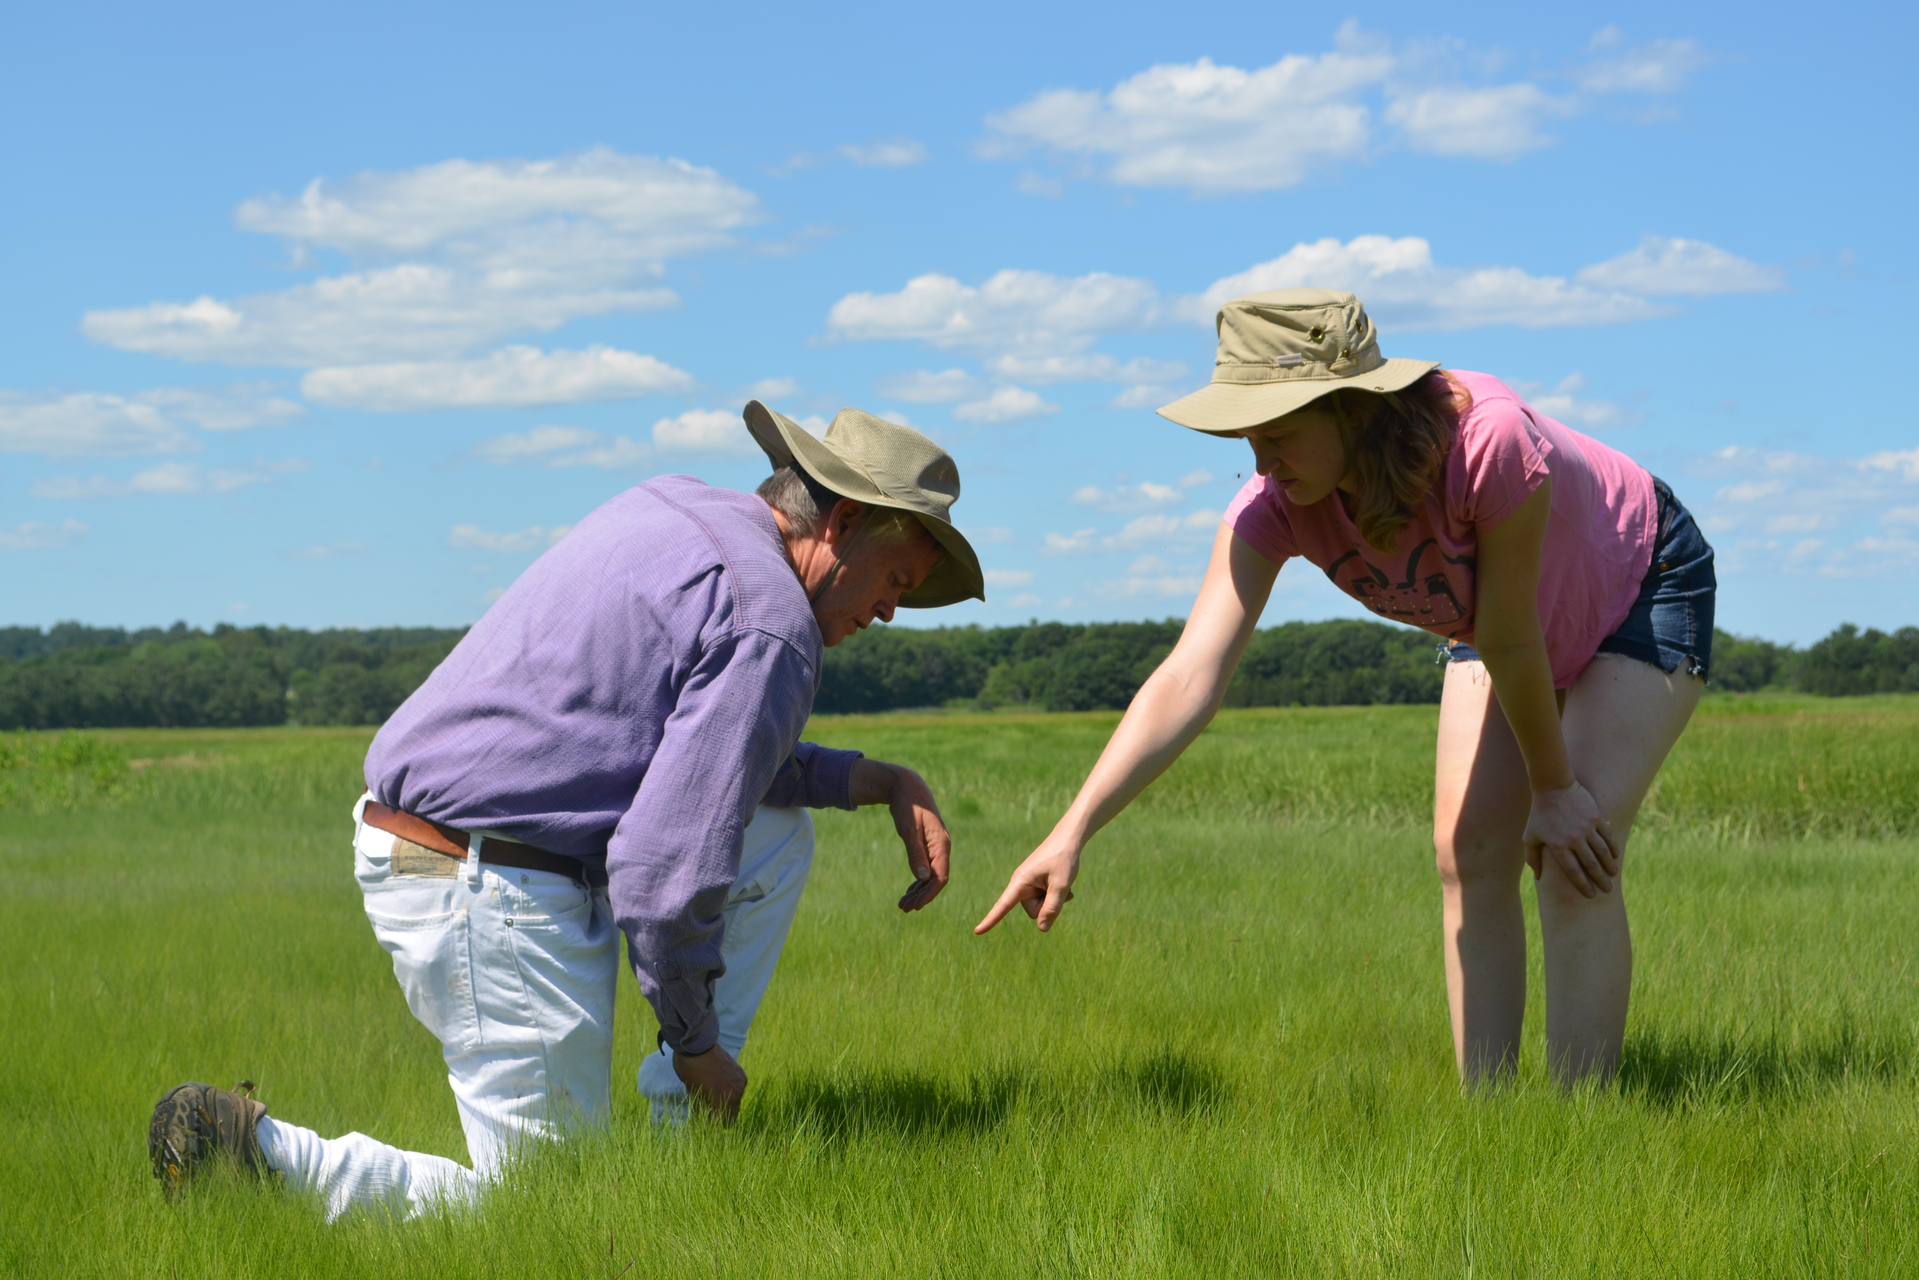 Two people in tan sun hats in a grassy marsh. One is one their knee looking into the grass, while the other is bent over and pointing.